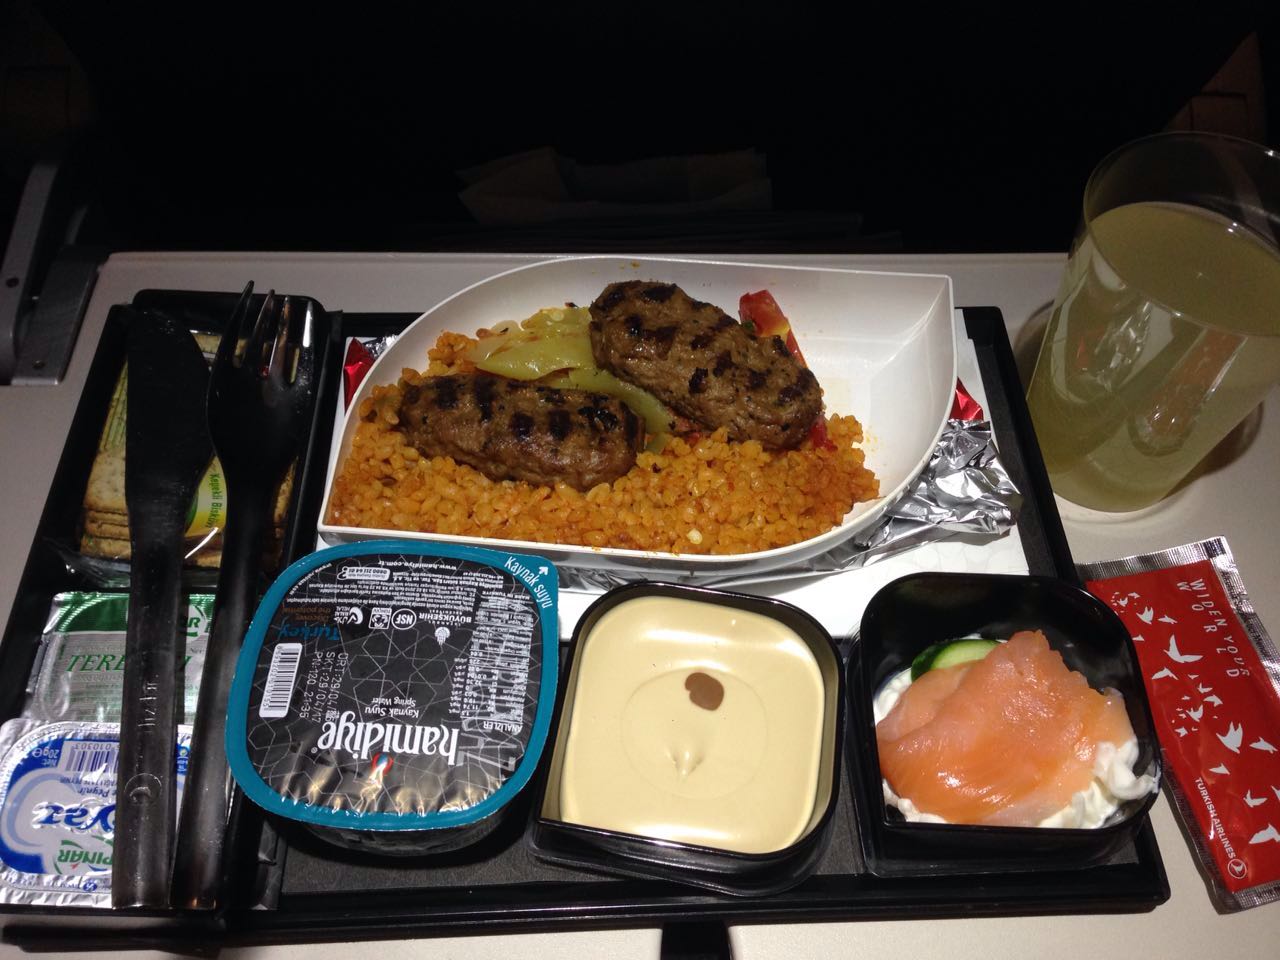 Turkish Airlines Inflight Meal (Istanbul-Zurich)